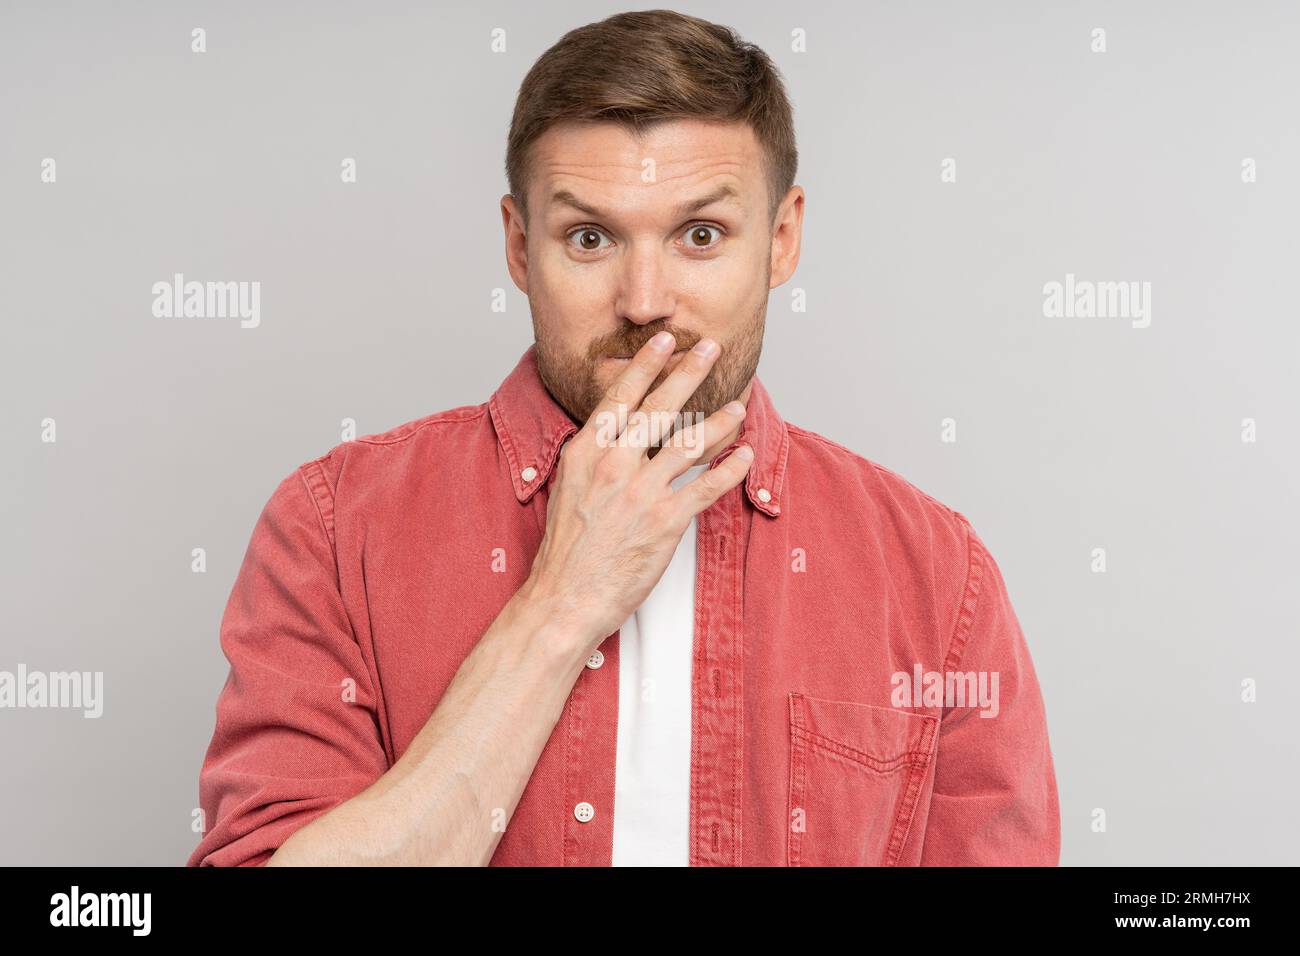 Amazed confused man with raised eyebrows covering mouth with hand looking at camera on studio wall Stock Photo